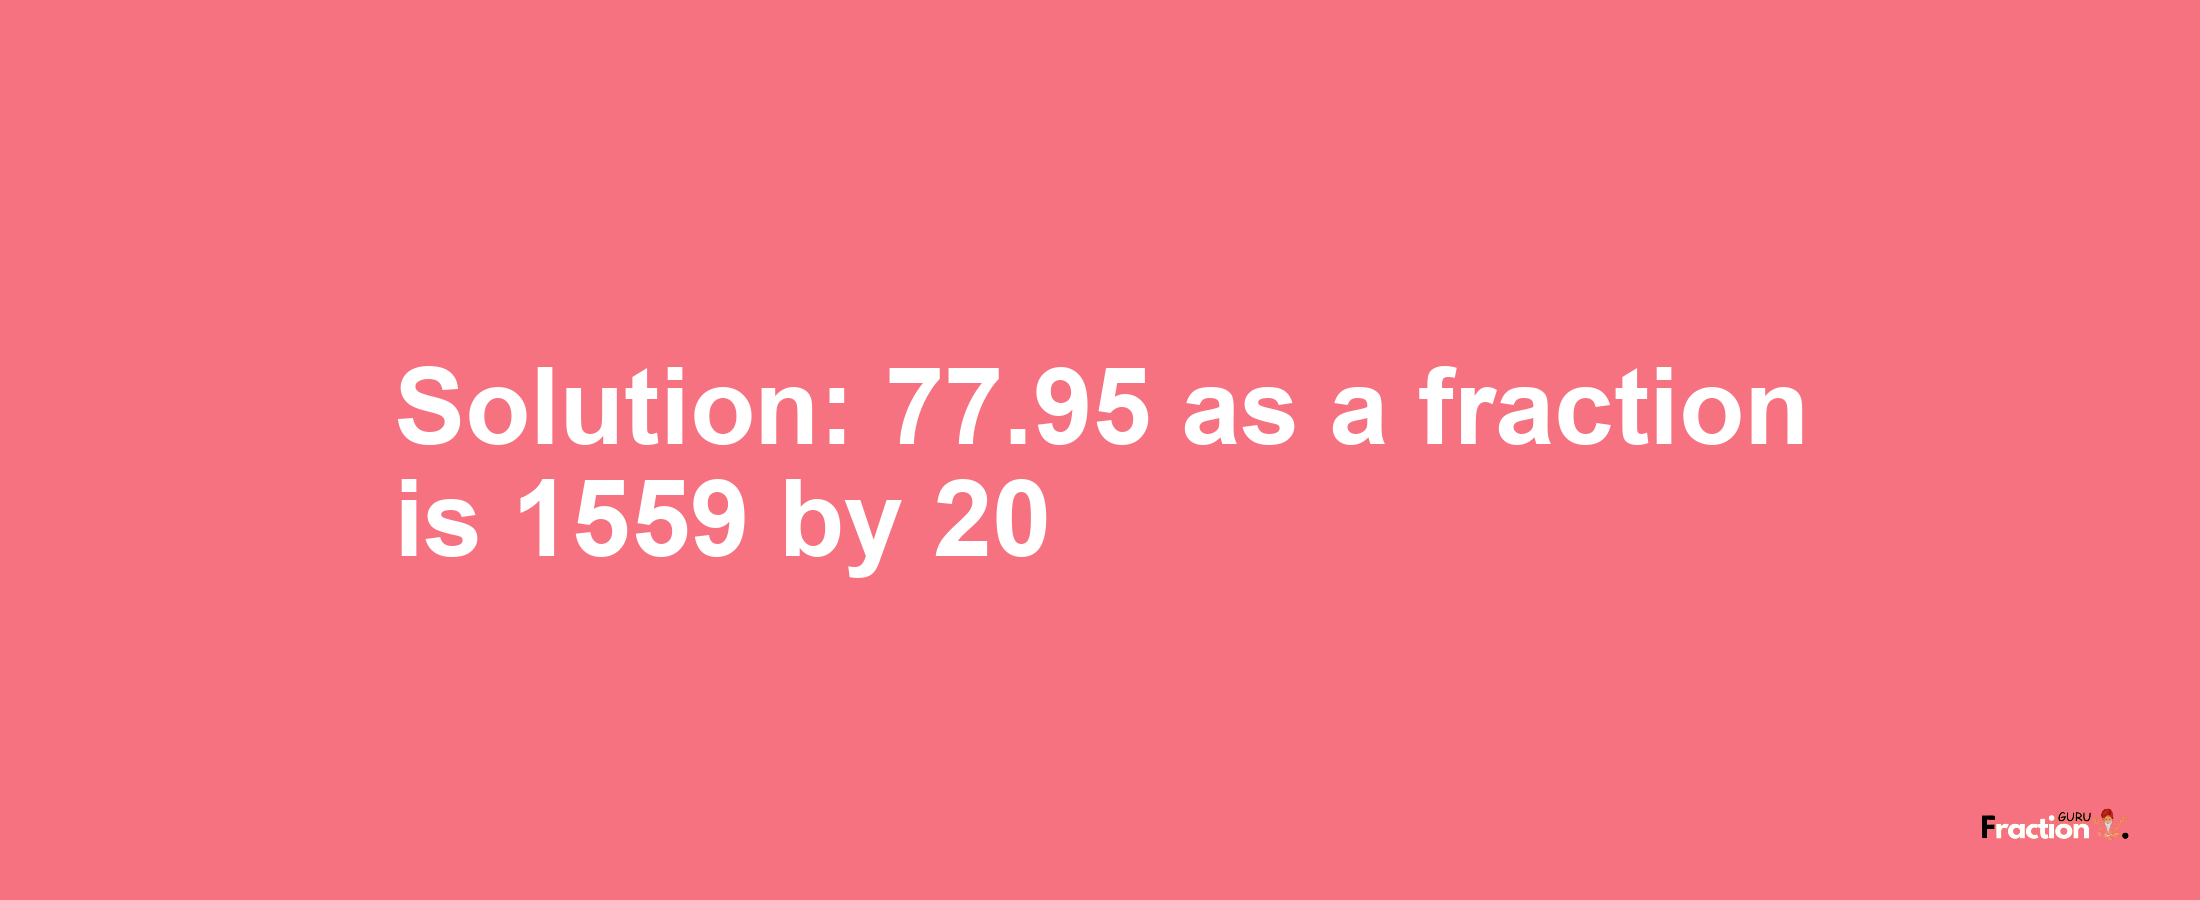 Solution:77.95 as a fraction is 1559/20